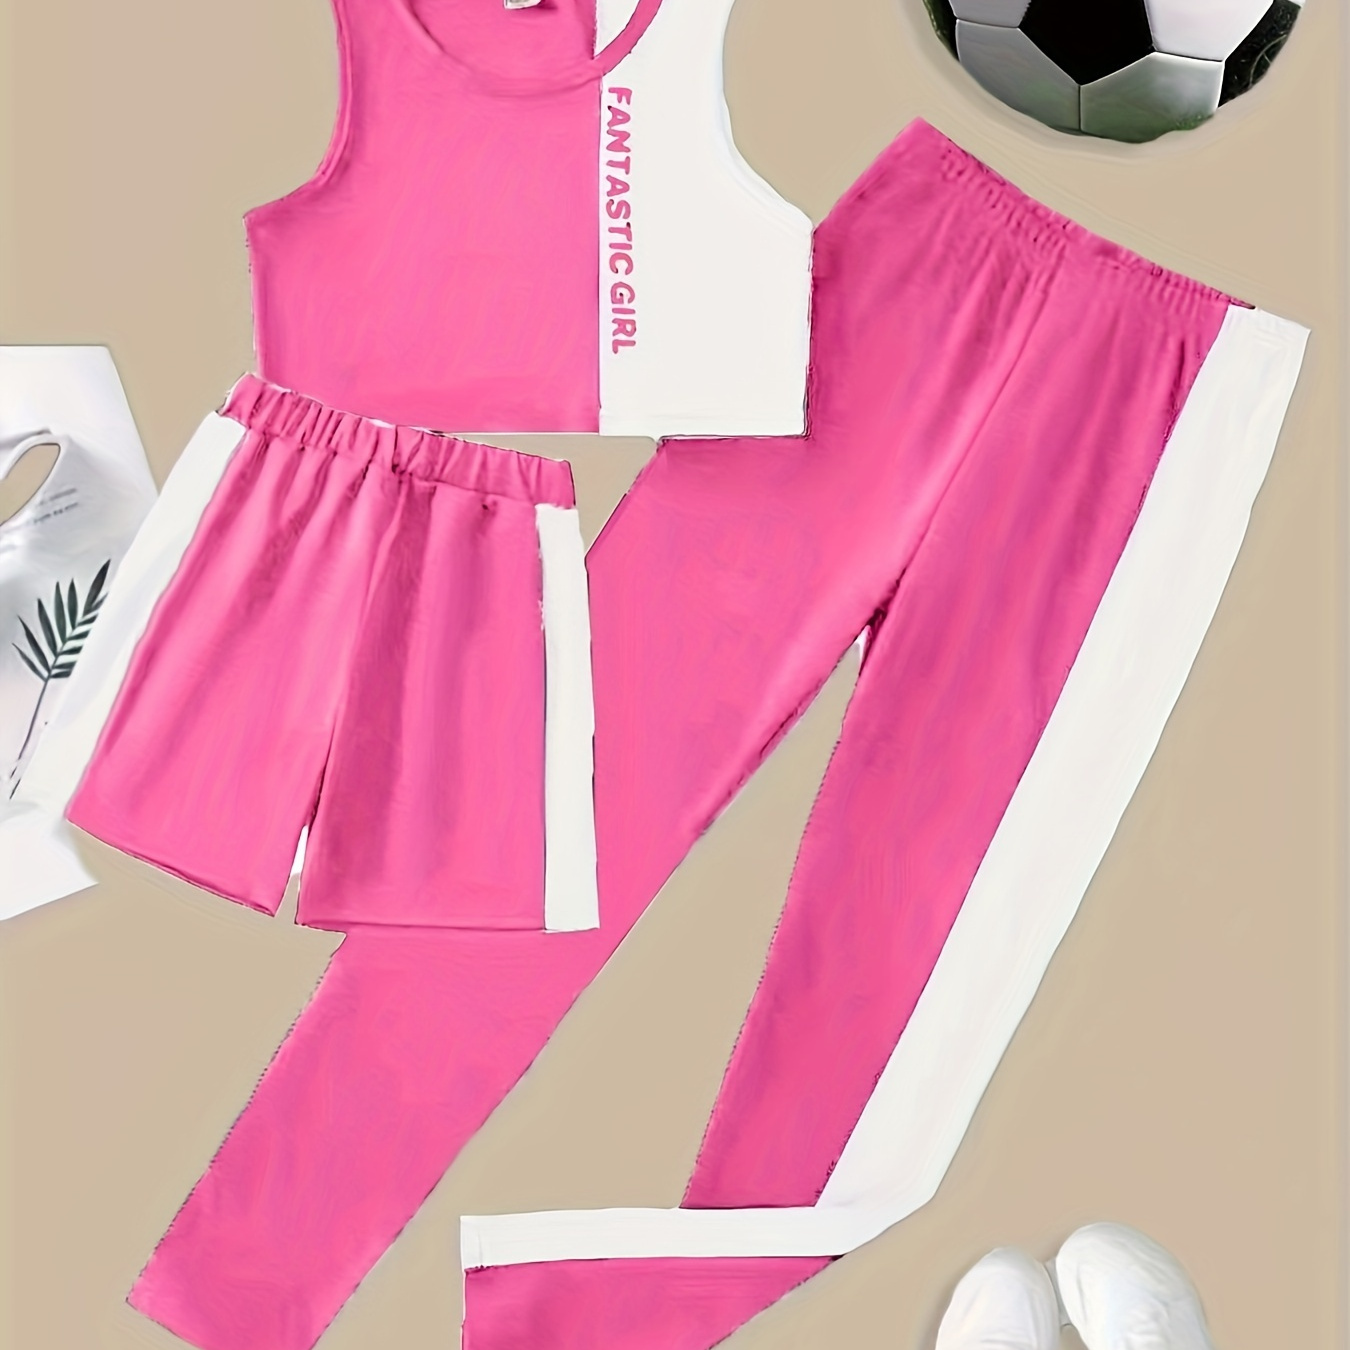 

3pcs Girls Casual Tracksuit, Color Block Sports Crop Top & Shorts & Pants, Breathable Summer Active Wear Outfit